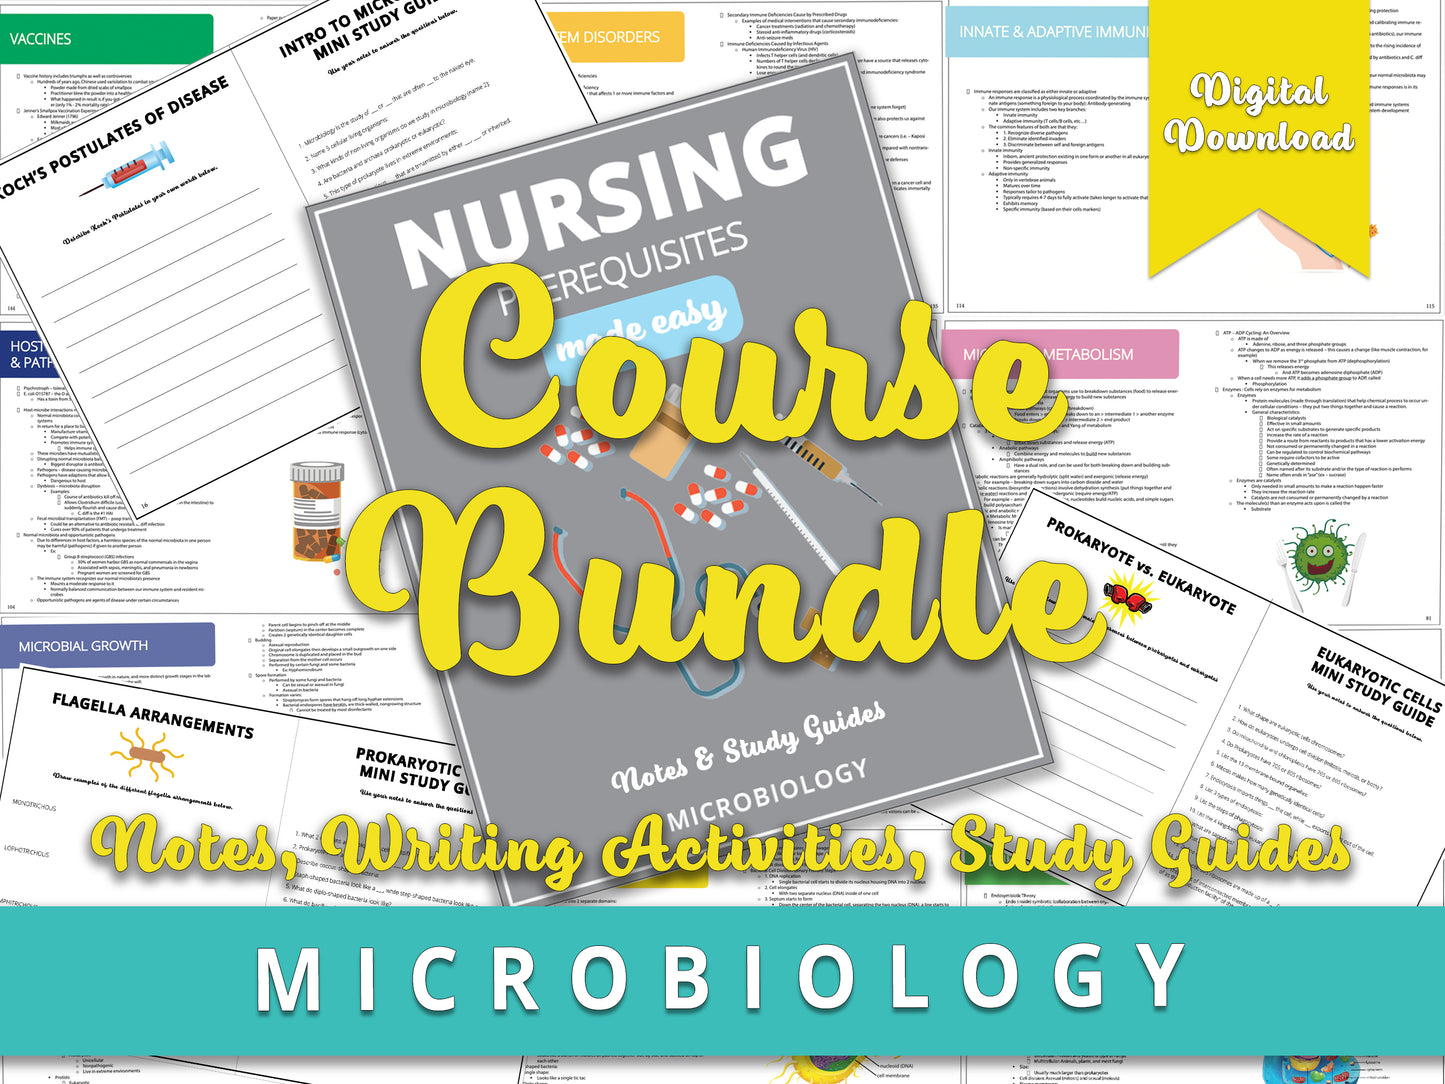 Microbiology notes, microbiology study guide, microbiology bundle for college students 